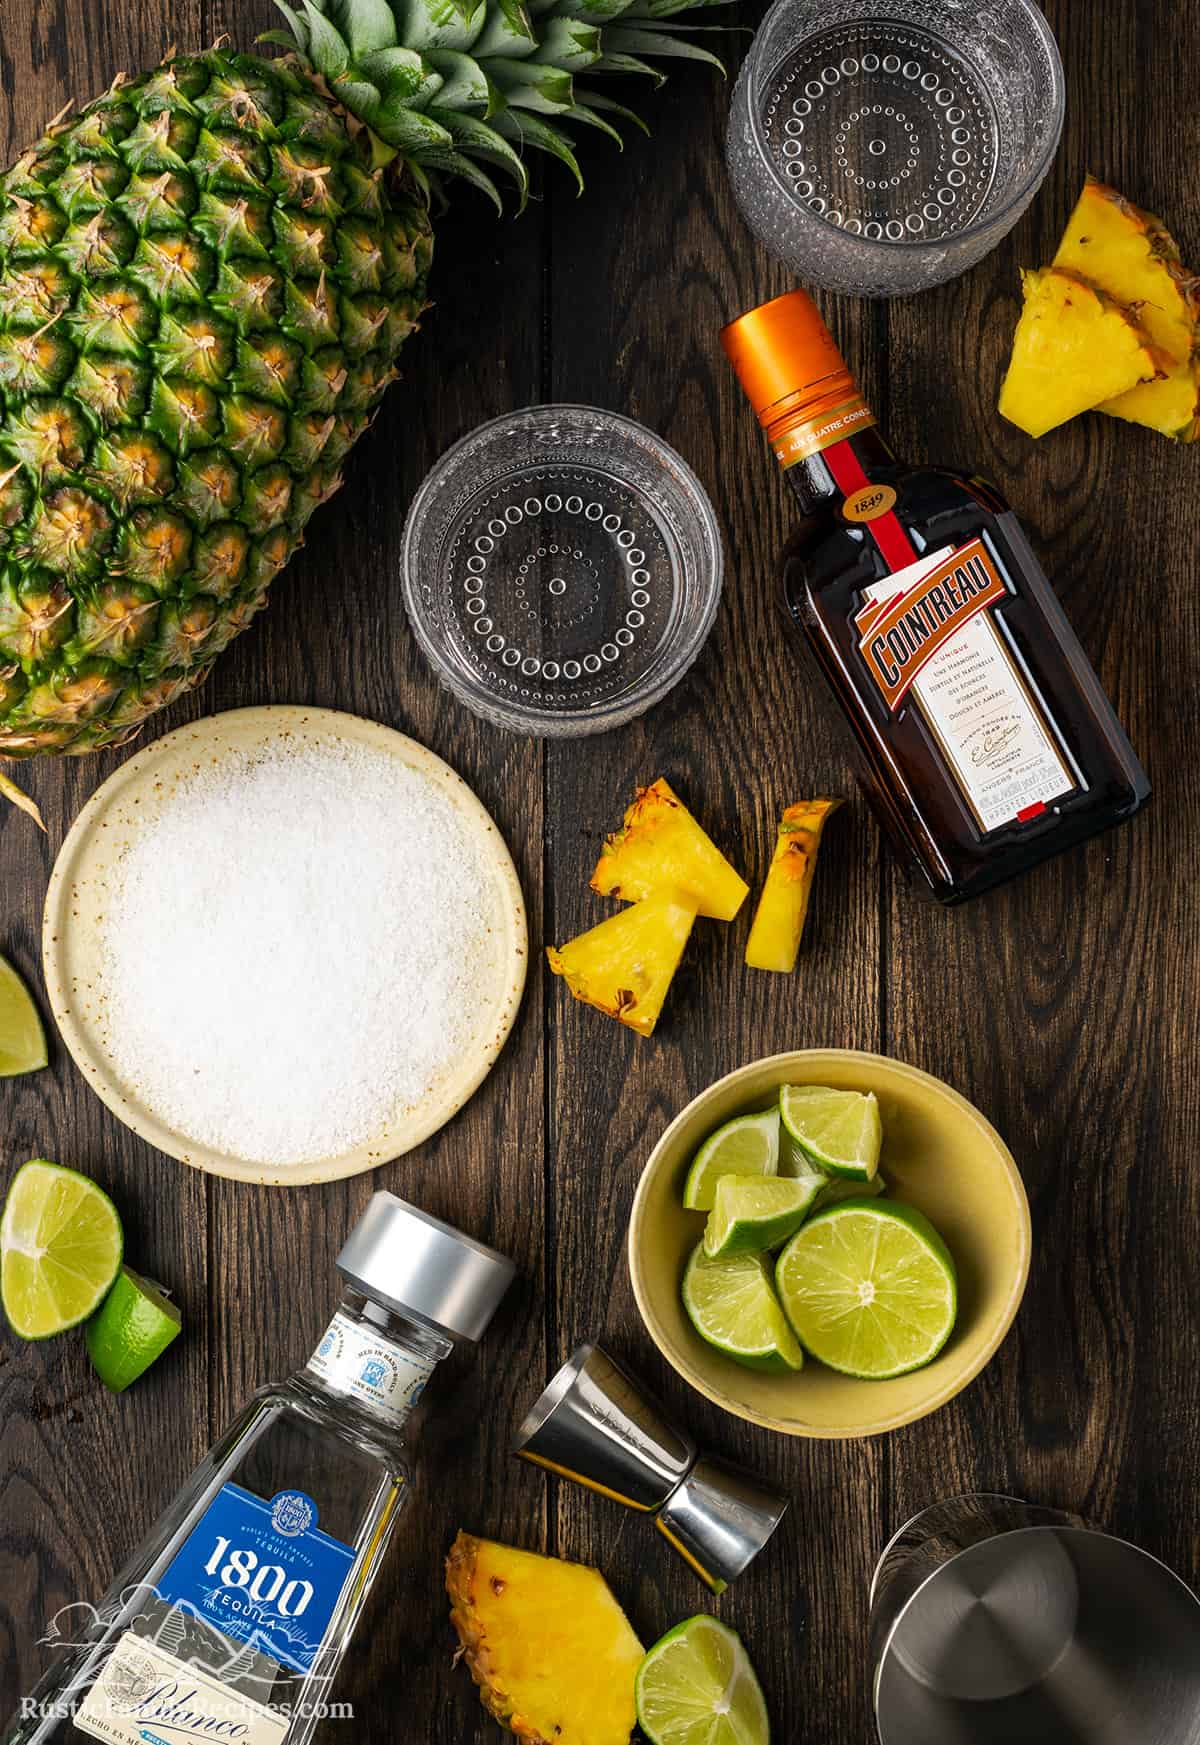 Ingredients for a pineapple margarita on a wood table